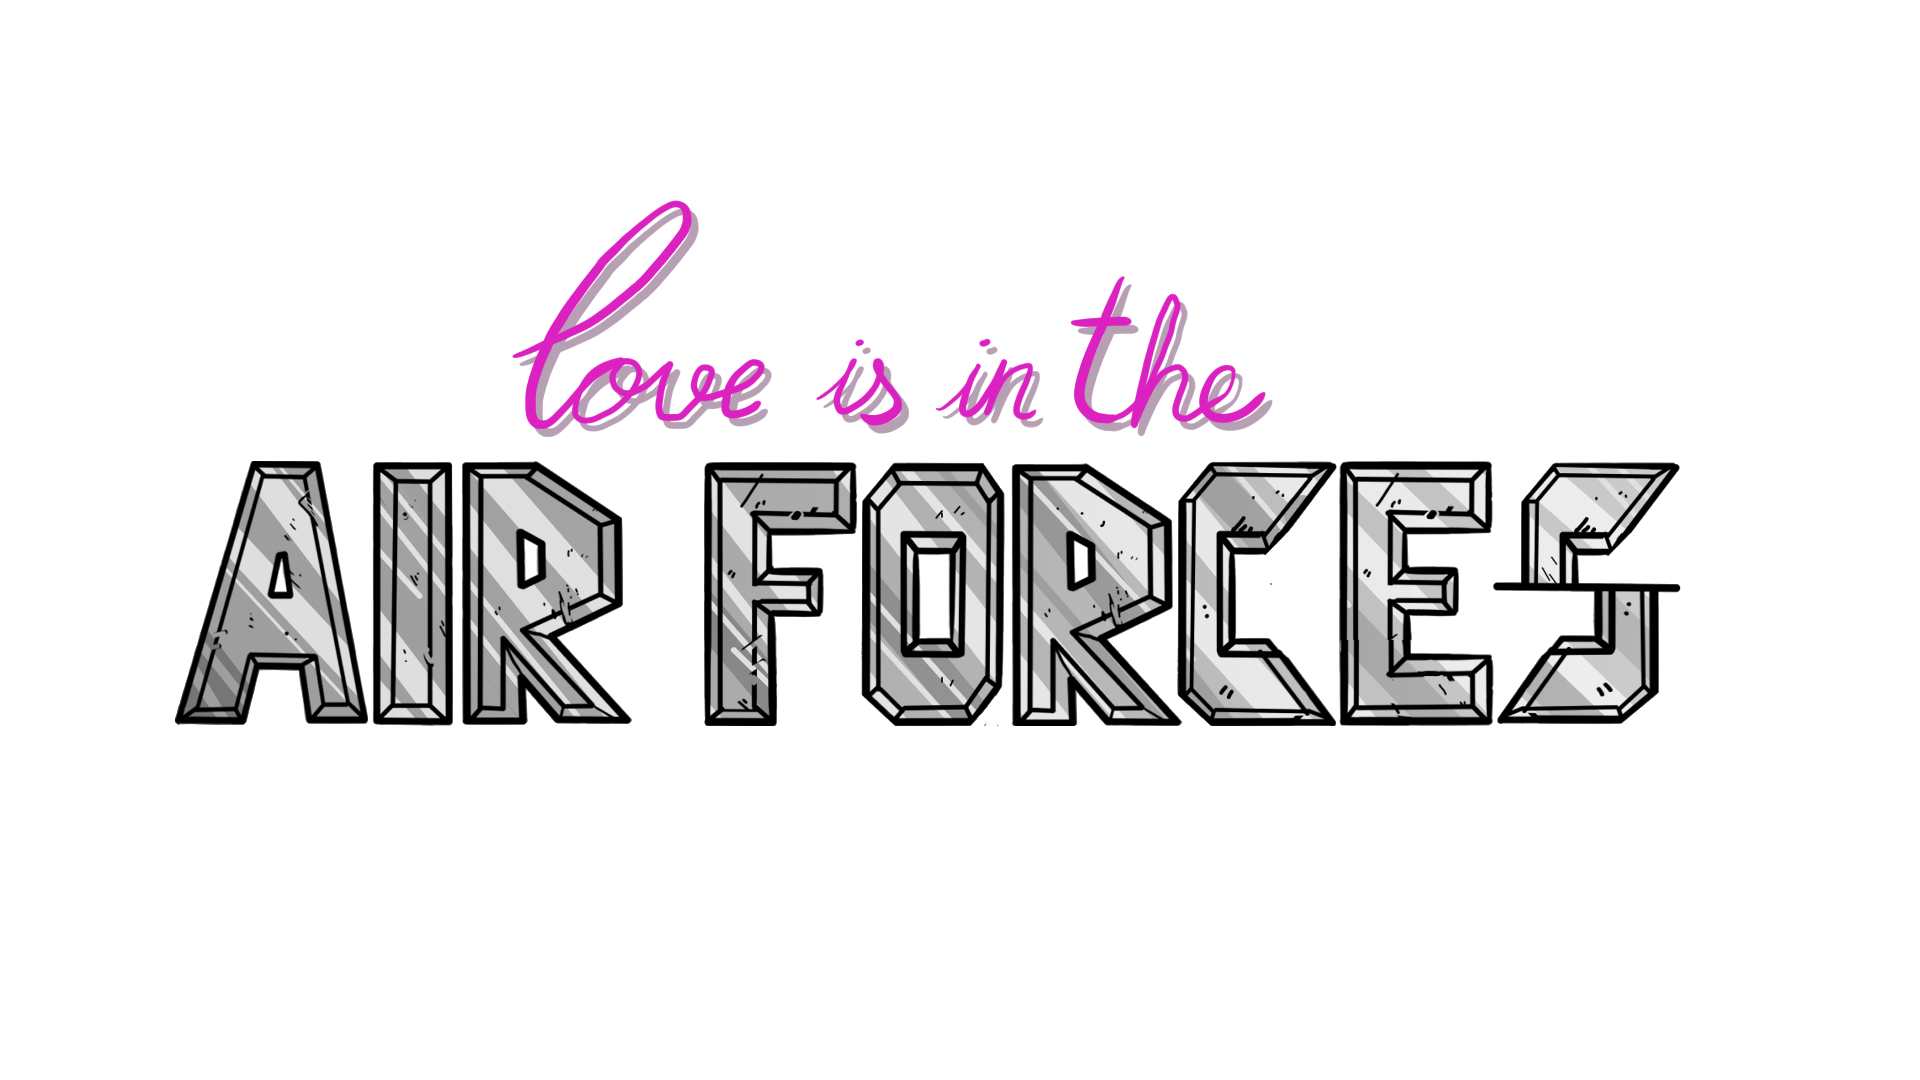 Love is in the air (forces)